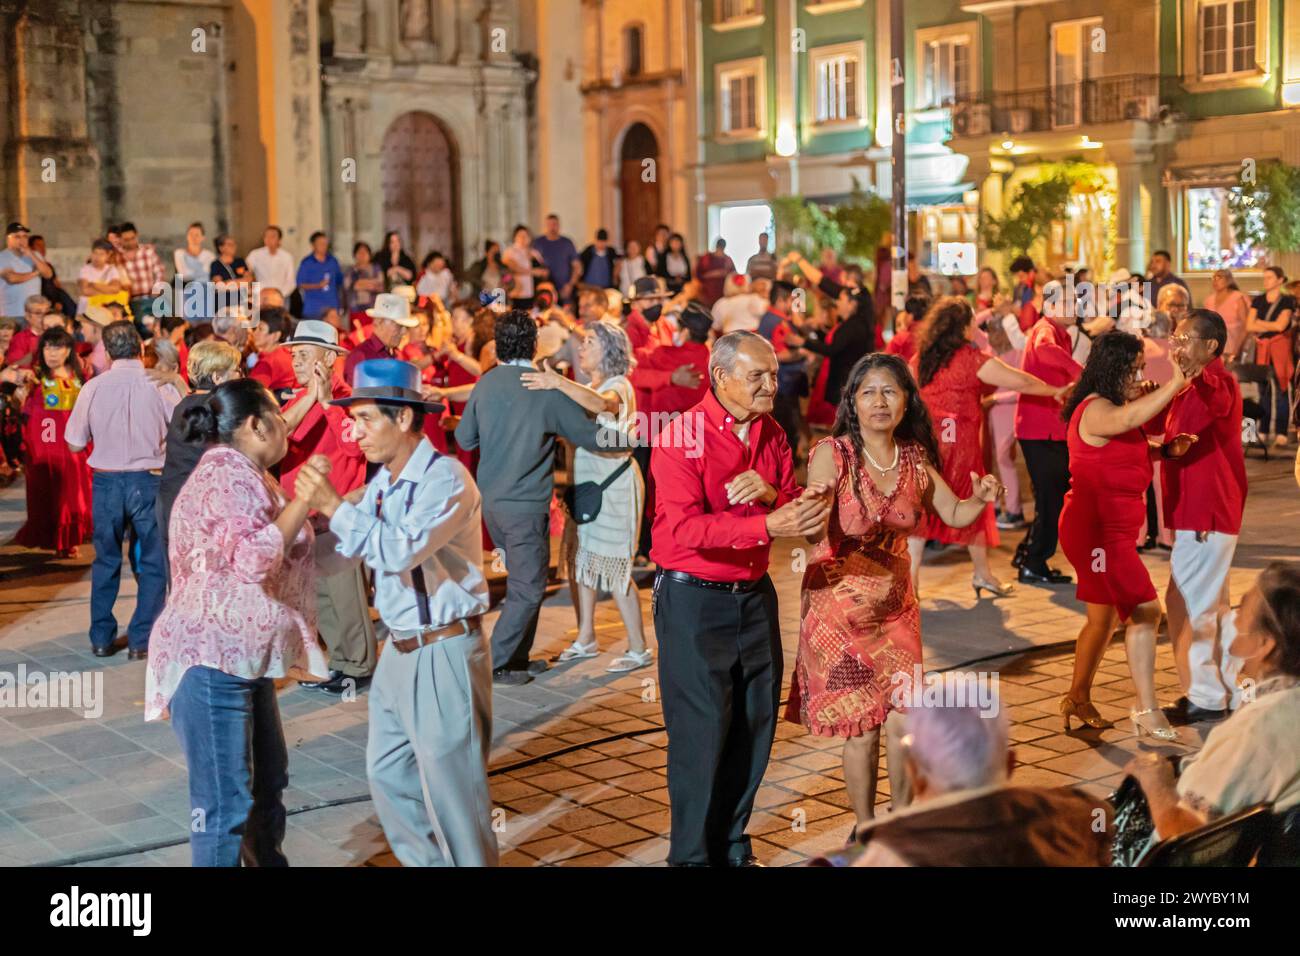 Oaxaca, Mexico - The weekly Wednesday dance in the zocalo, or central square. This night the dance was on Valentine's Day, with many dancers wearing r Stock Photo